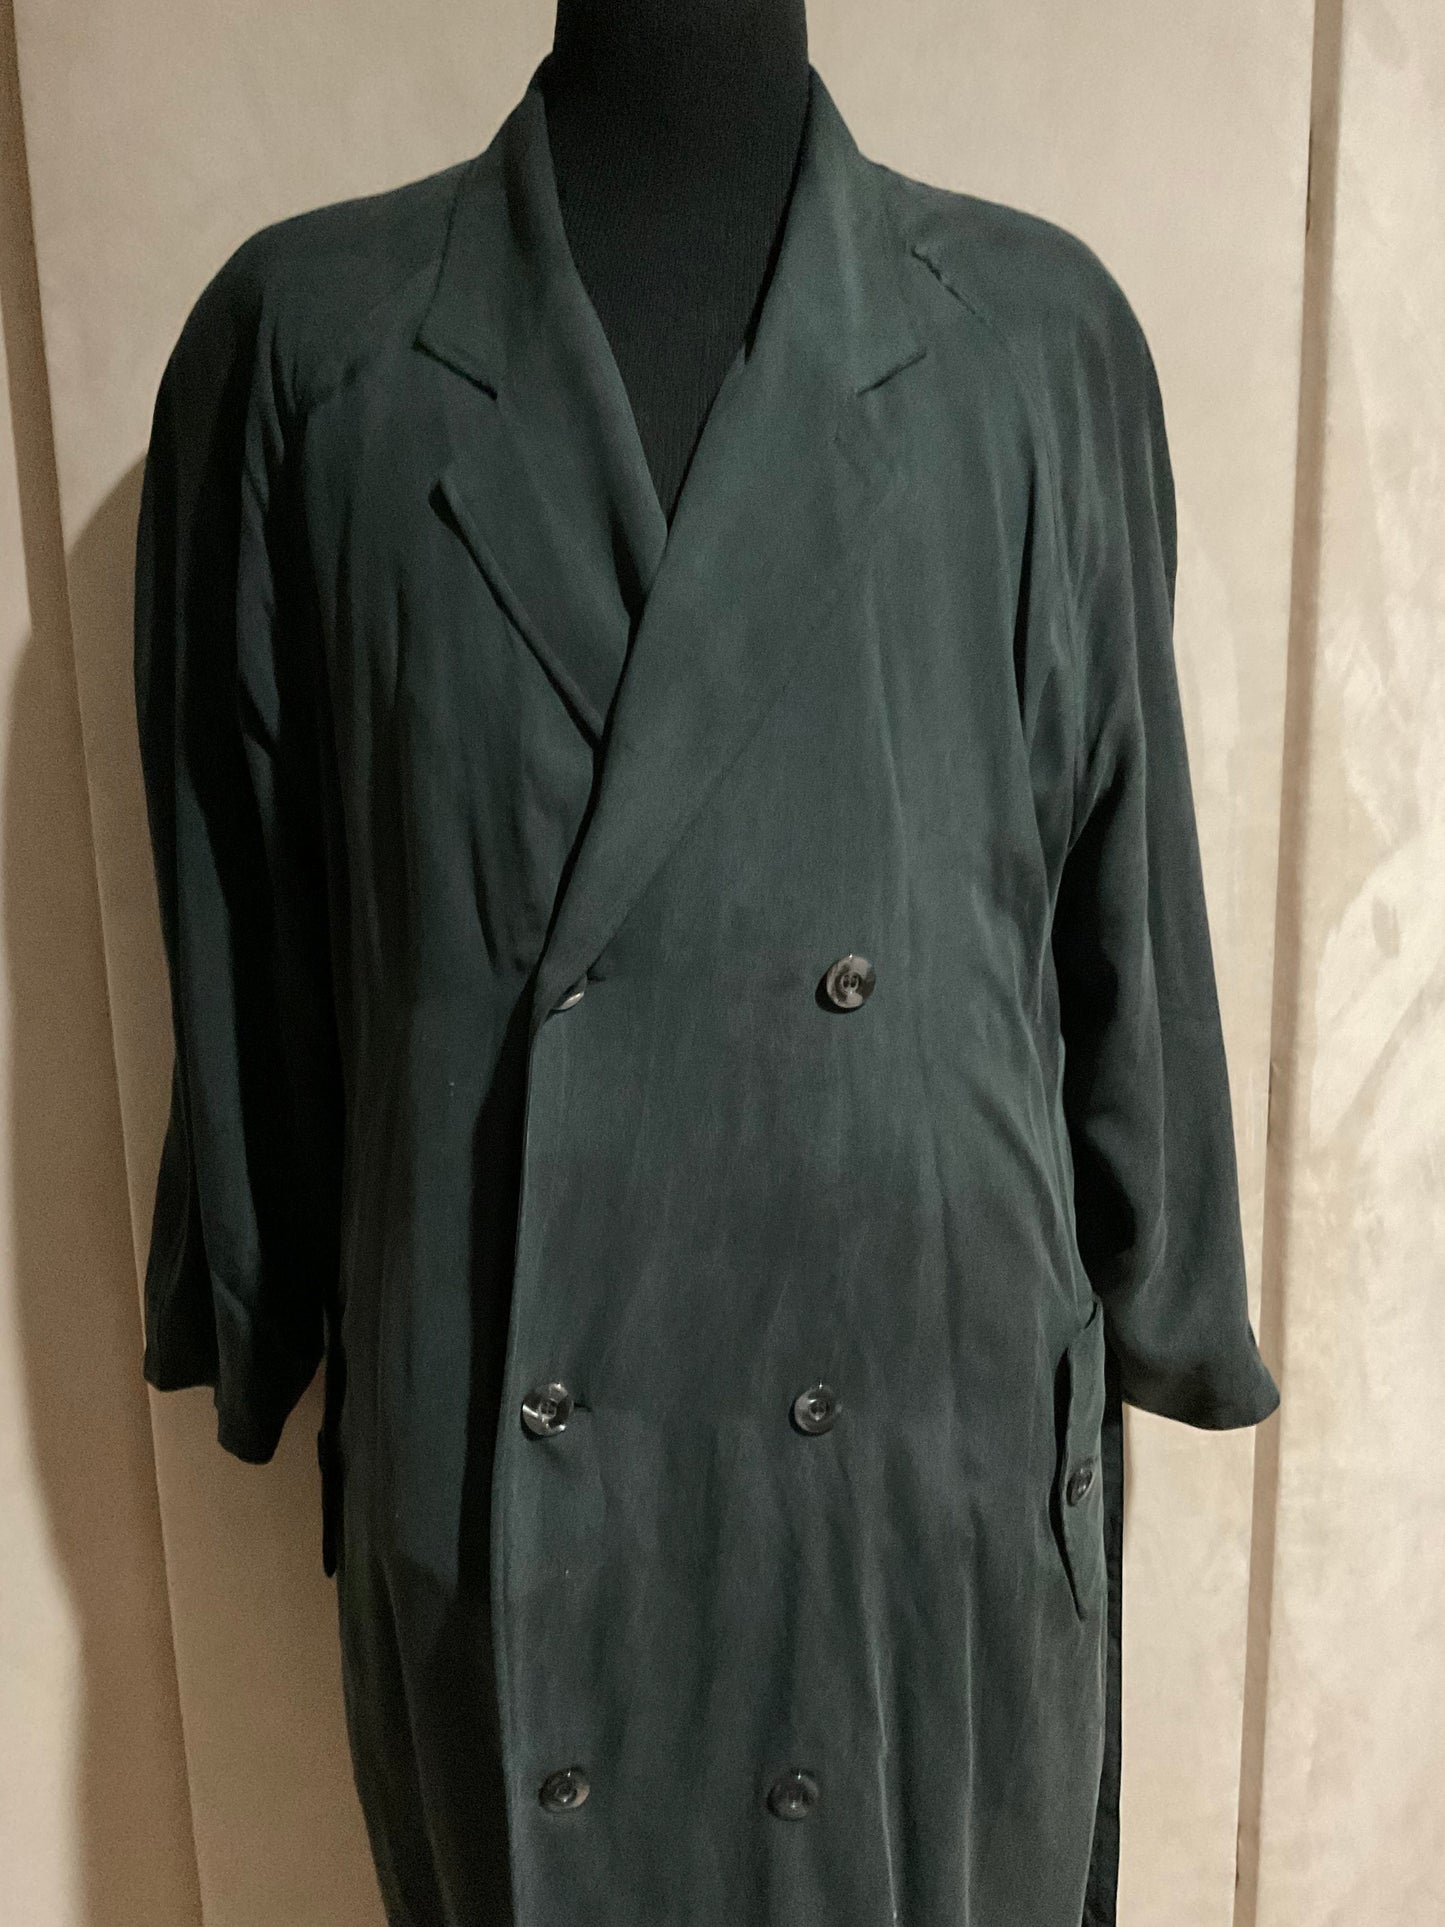 R P WASHED SILK DUSTER LONG COAT / DOUBLE BREASTED / NEW / BLACK / MEDIUM - LARGE